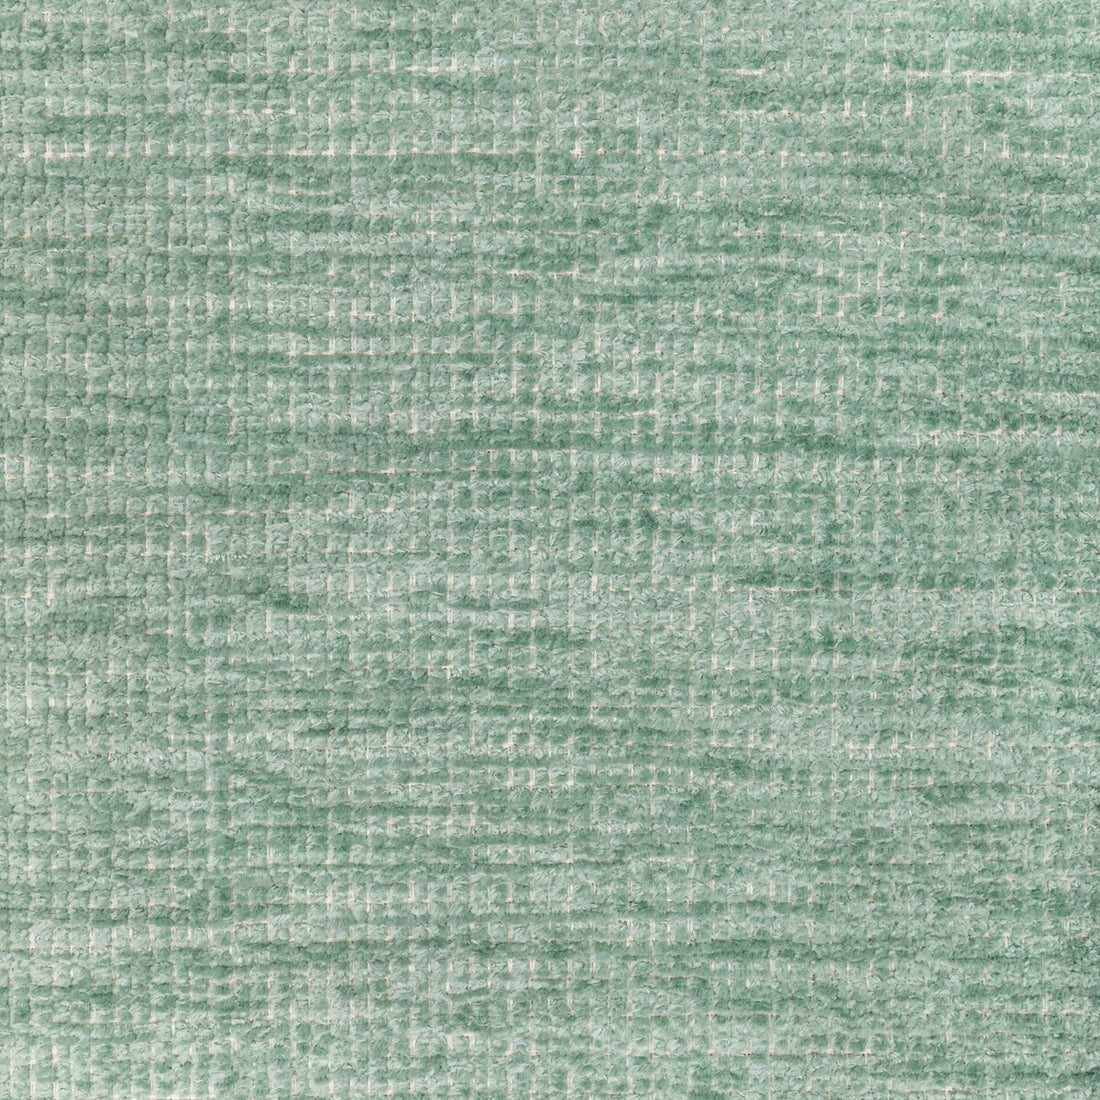 Lemenc Texture fabric in aqua color - pattern 8022124.13.0 - by Brunschwig &amp; Fils in the Chambery Textures III collection